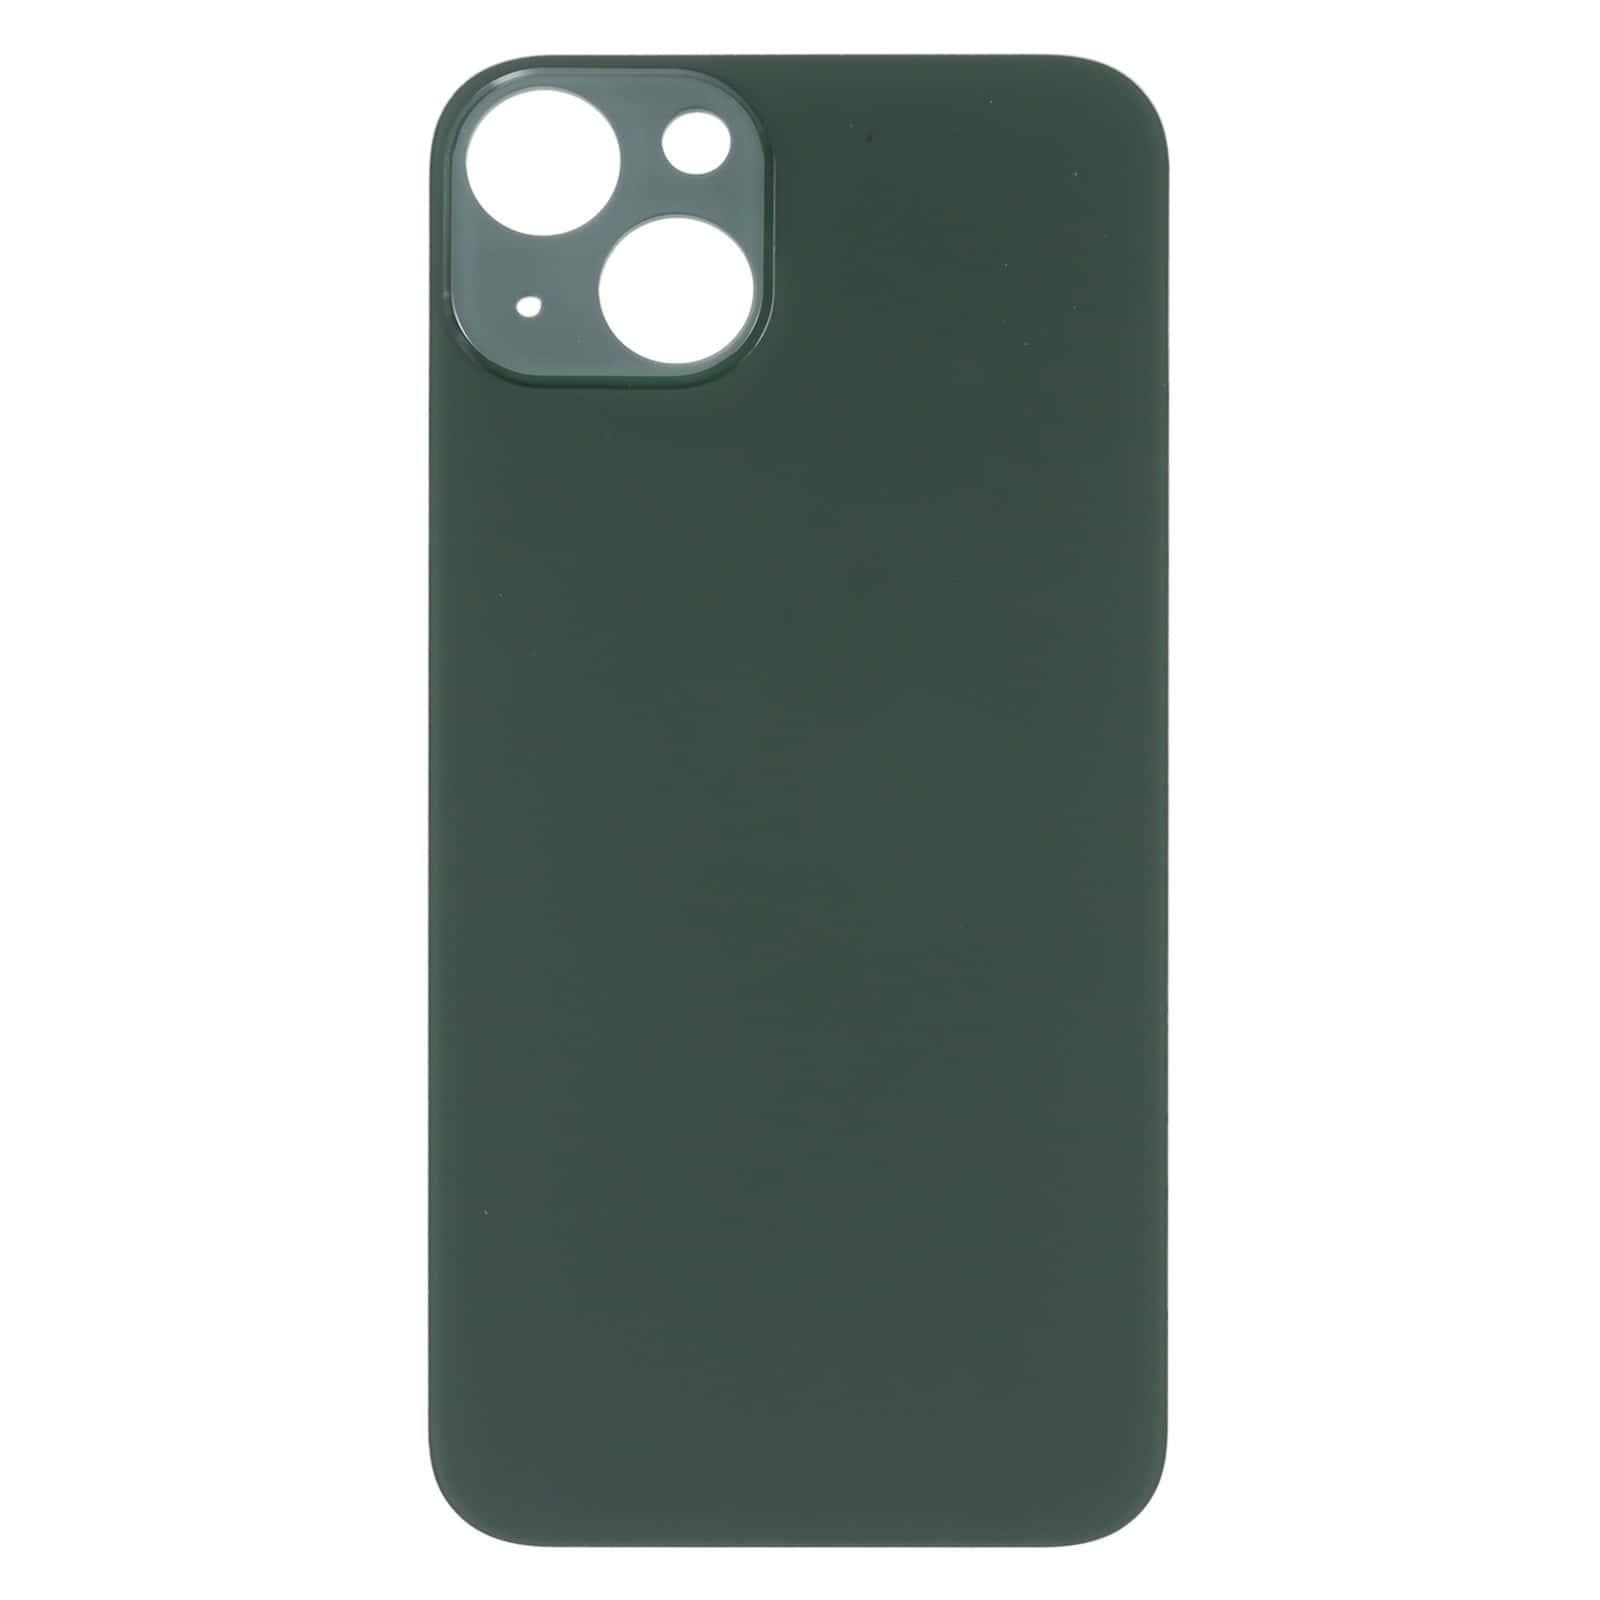 Back Glass Panel for iPhone 13 Green Big Camera Hole